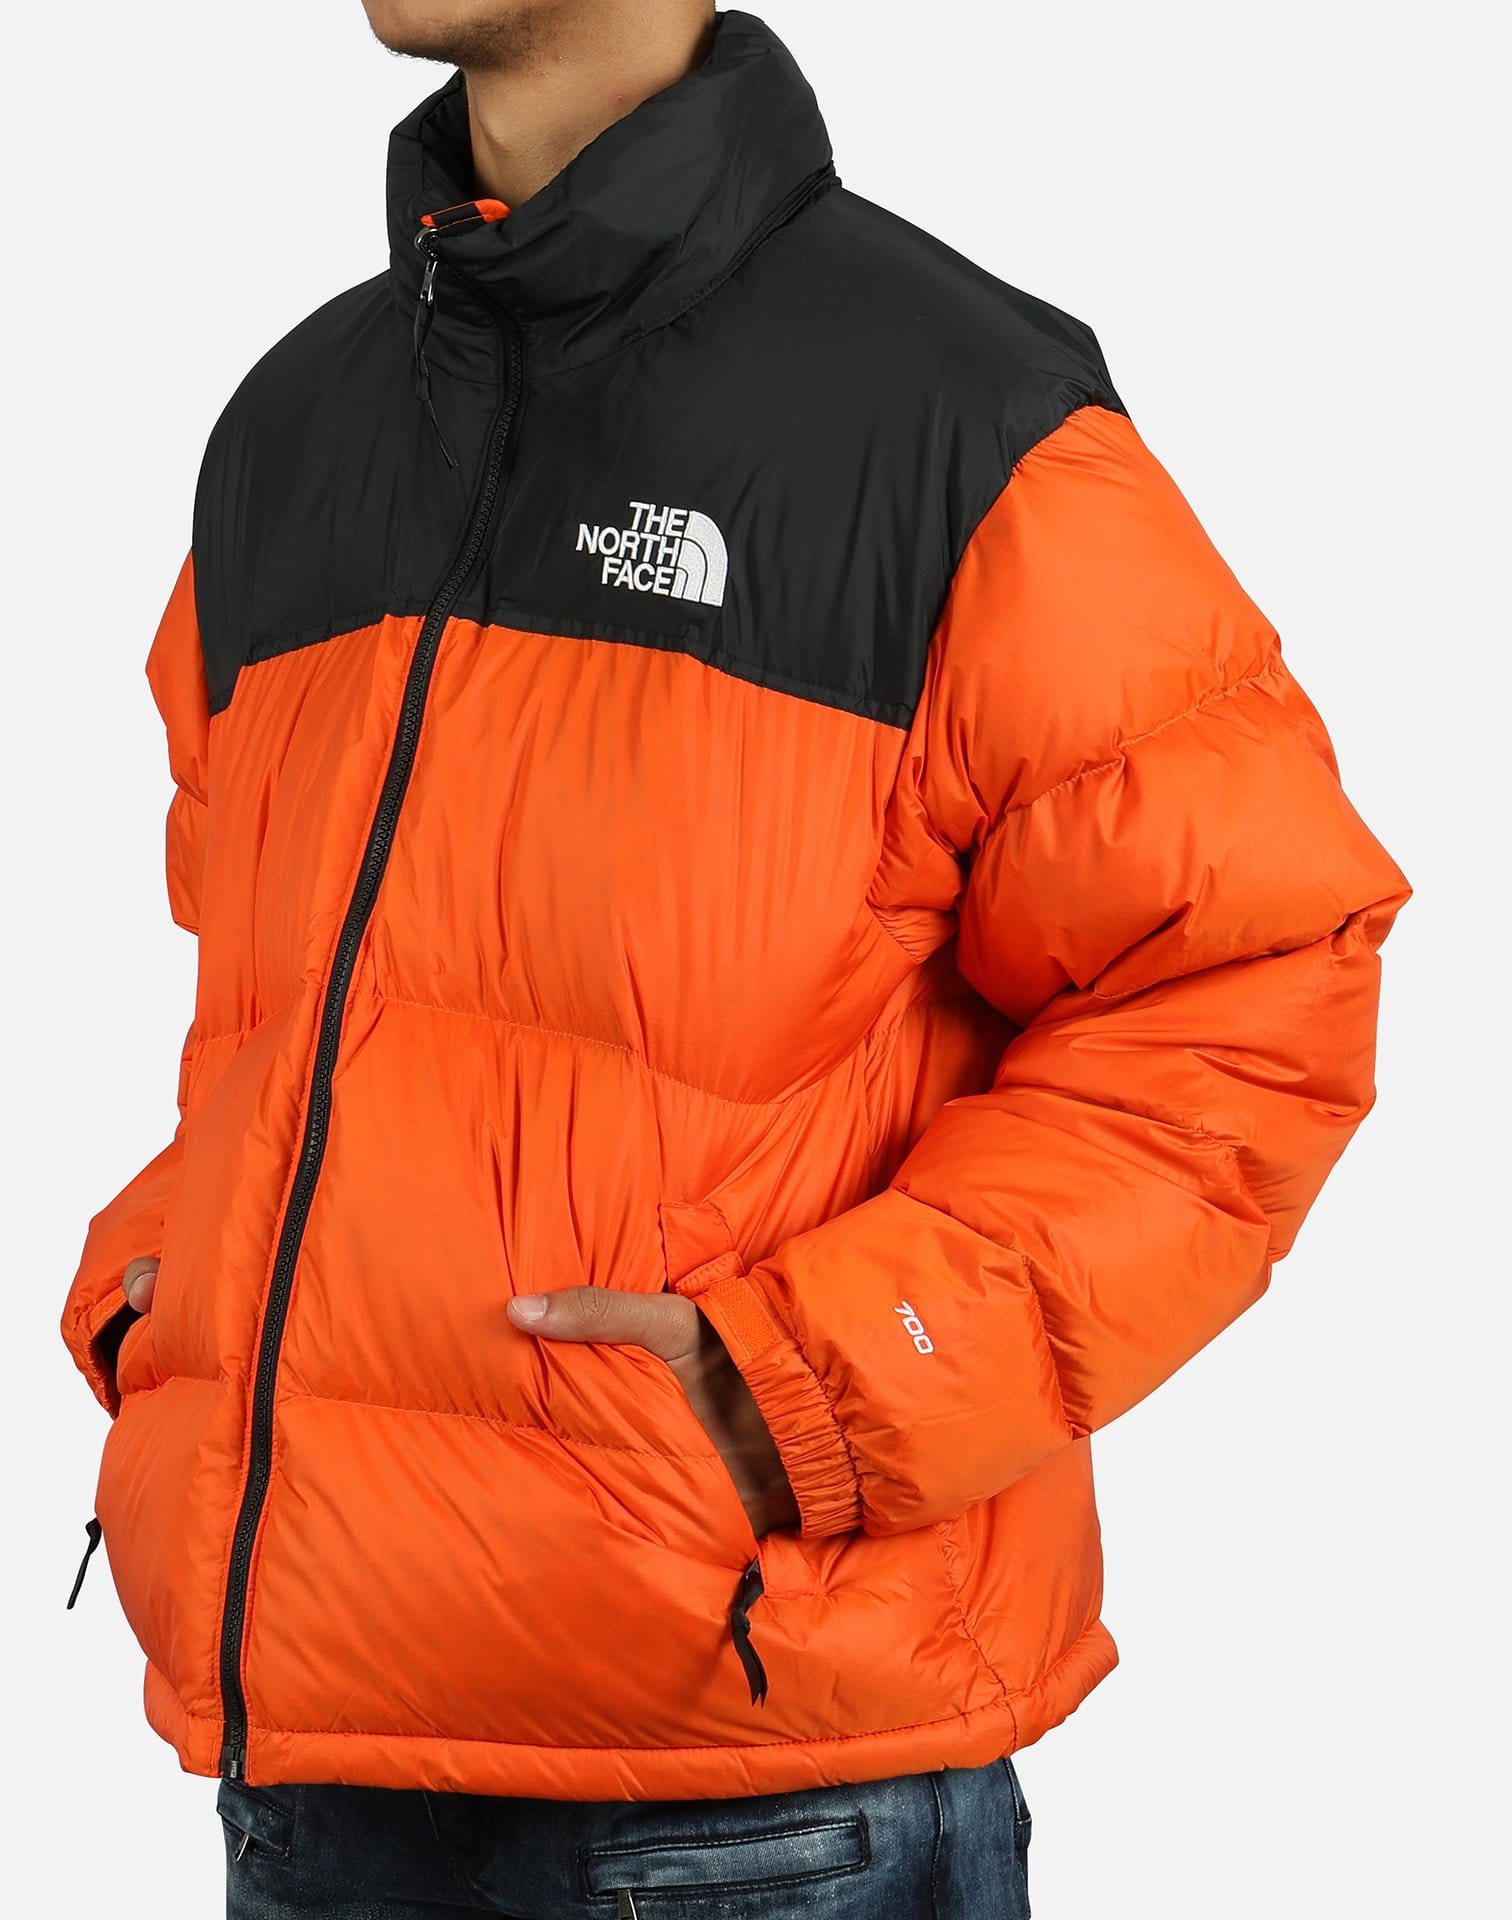 The North Face – DTLR